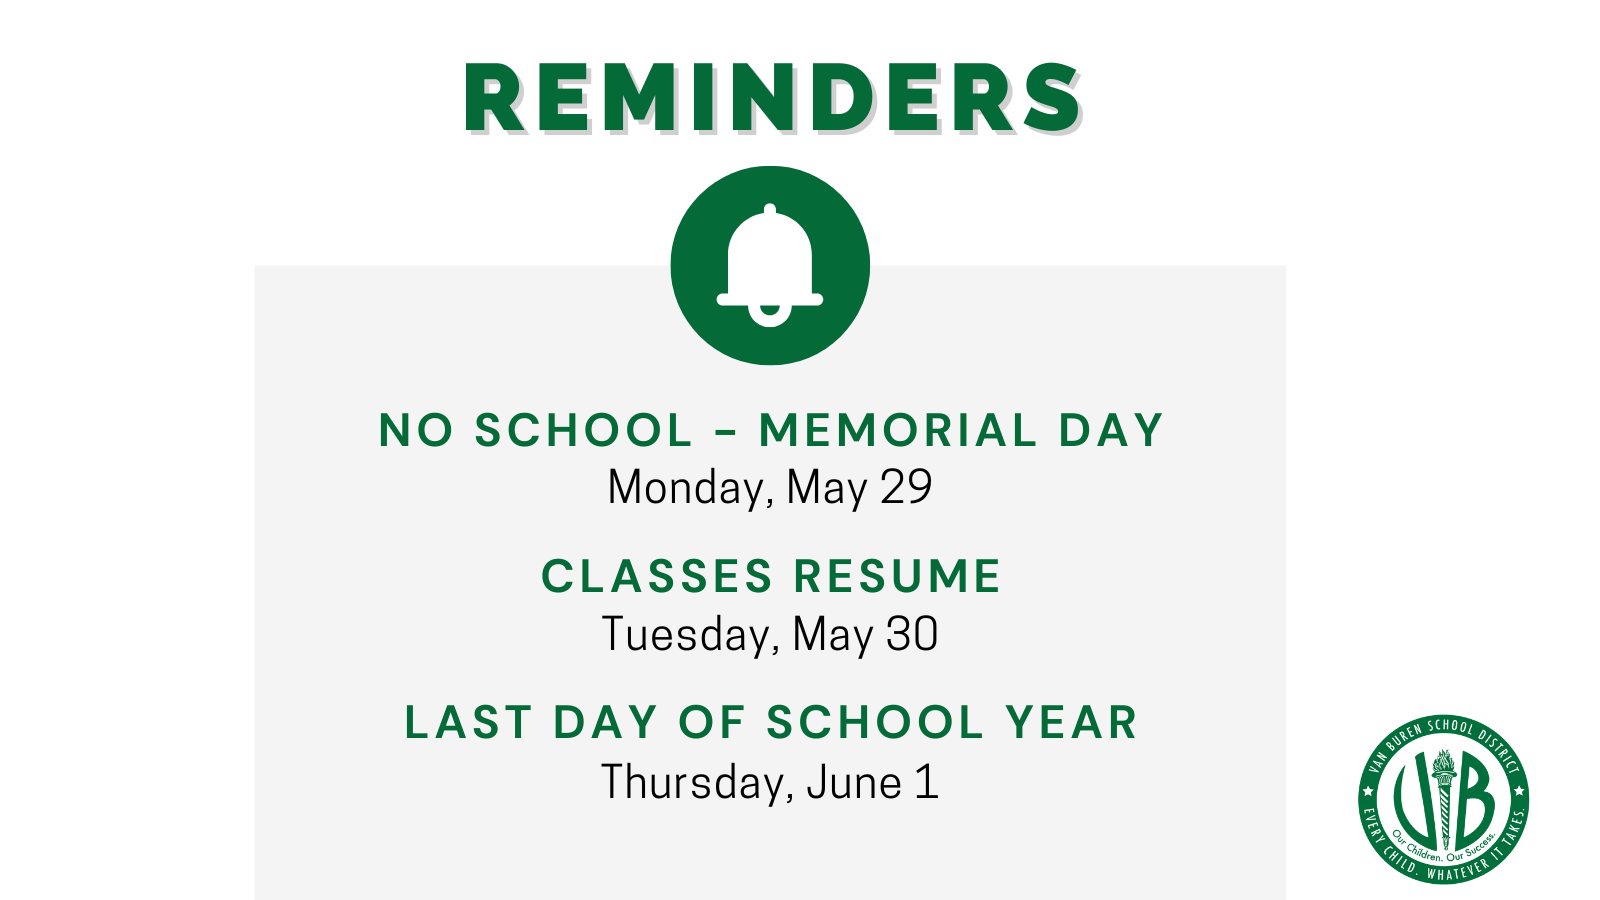 VBSD closed May 29 for Memorial Day